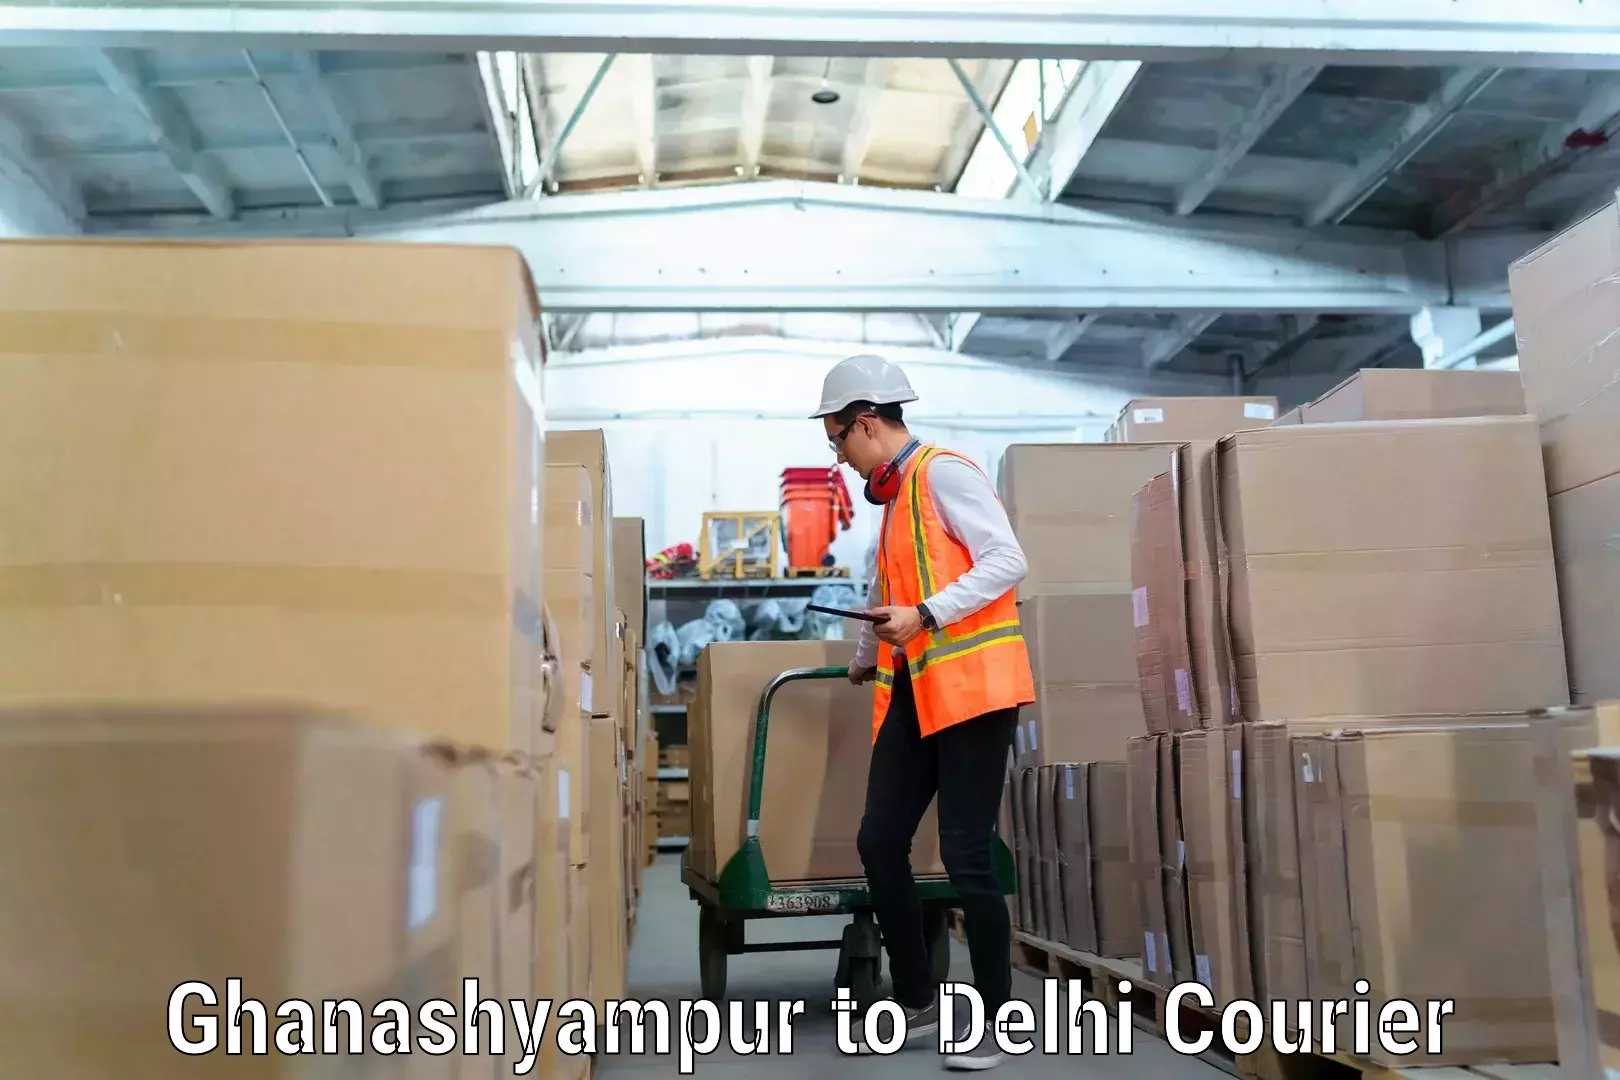 Professional furniture movers Ghanashyampur to Delhi